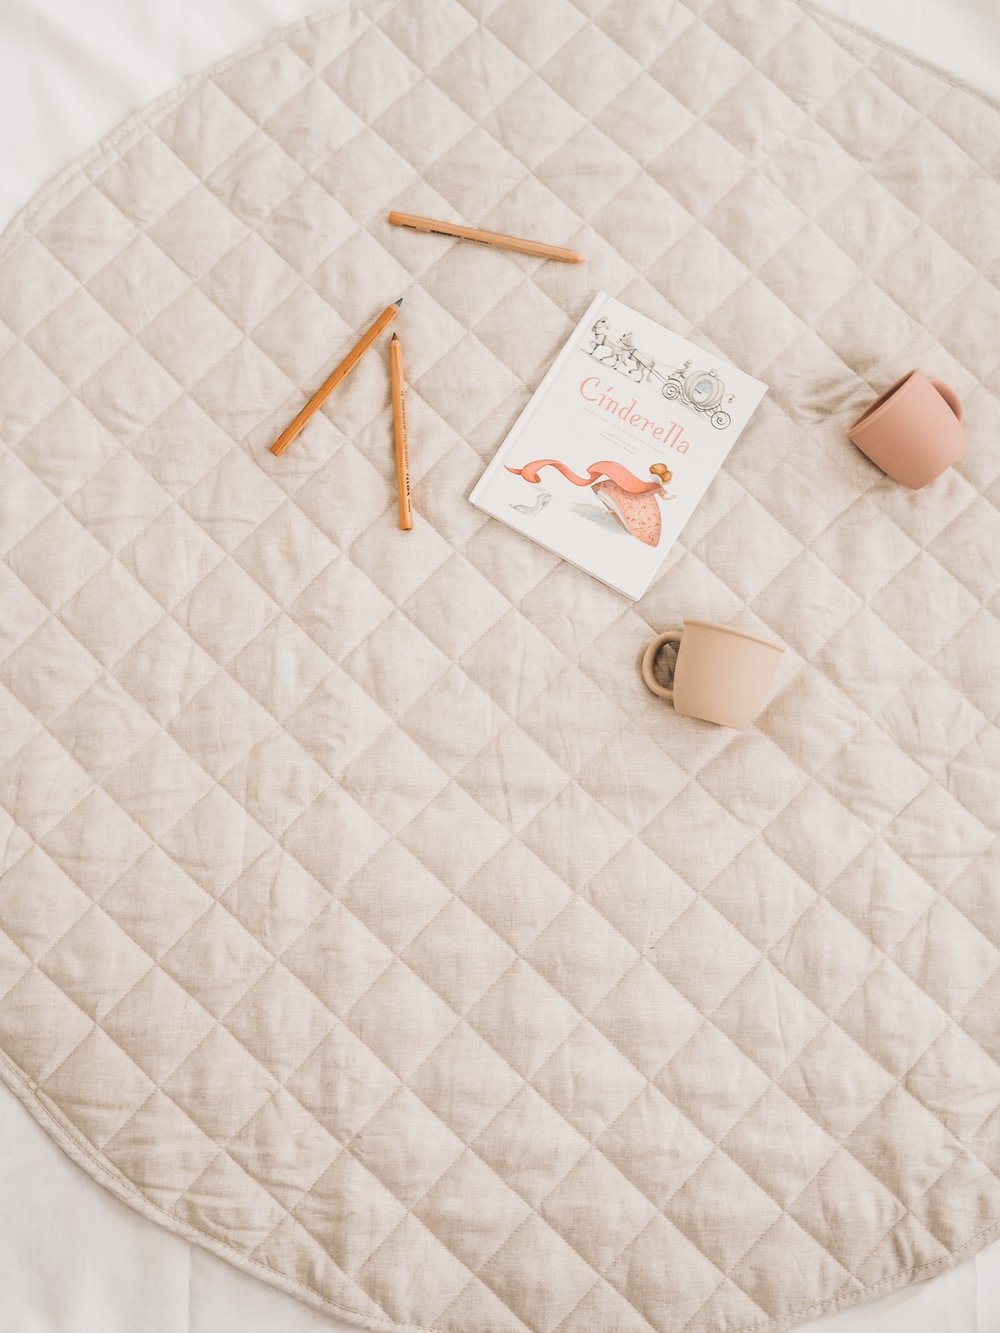 The Sustainable Life Pure Linen Play Mat